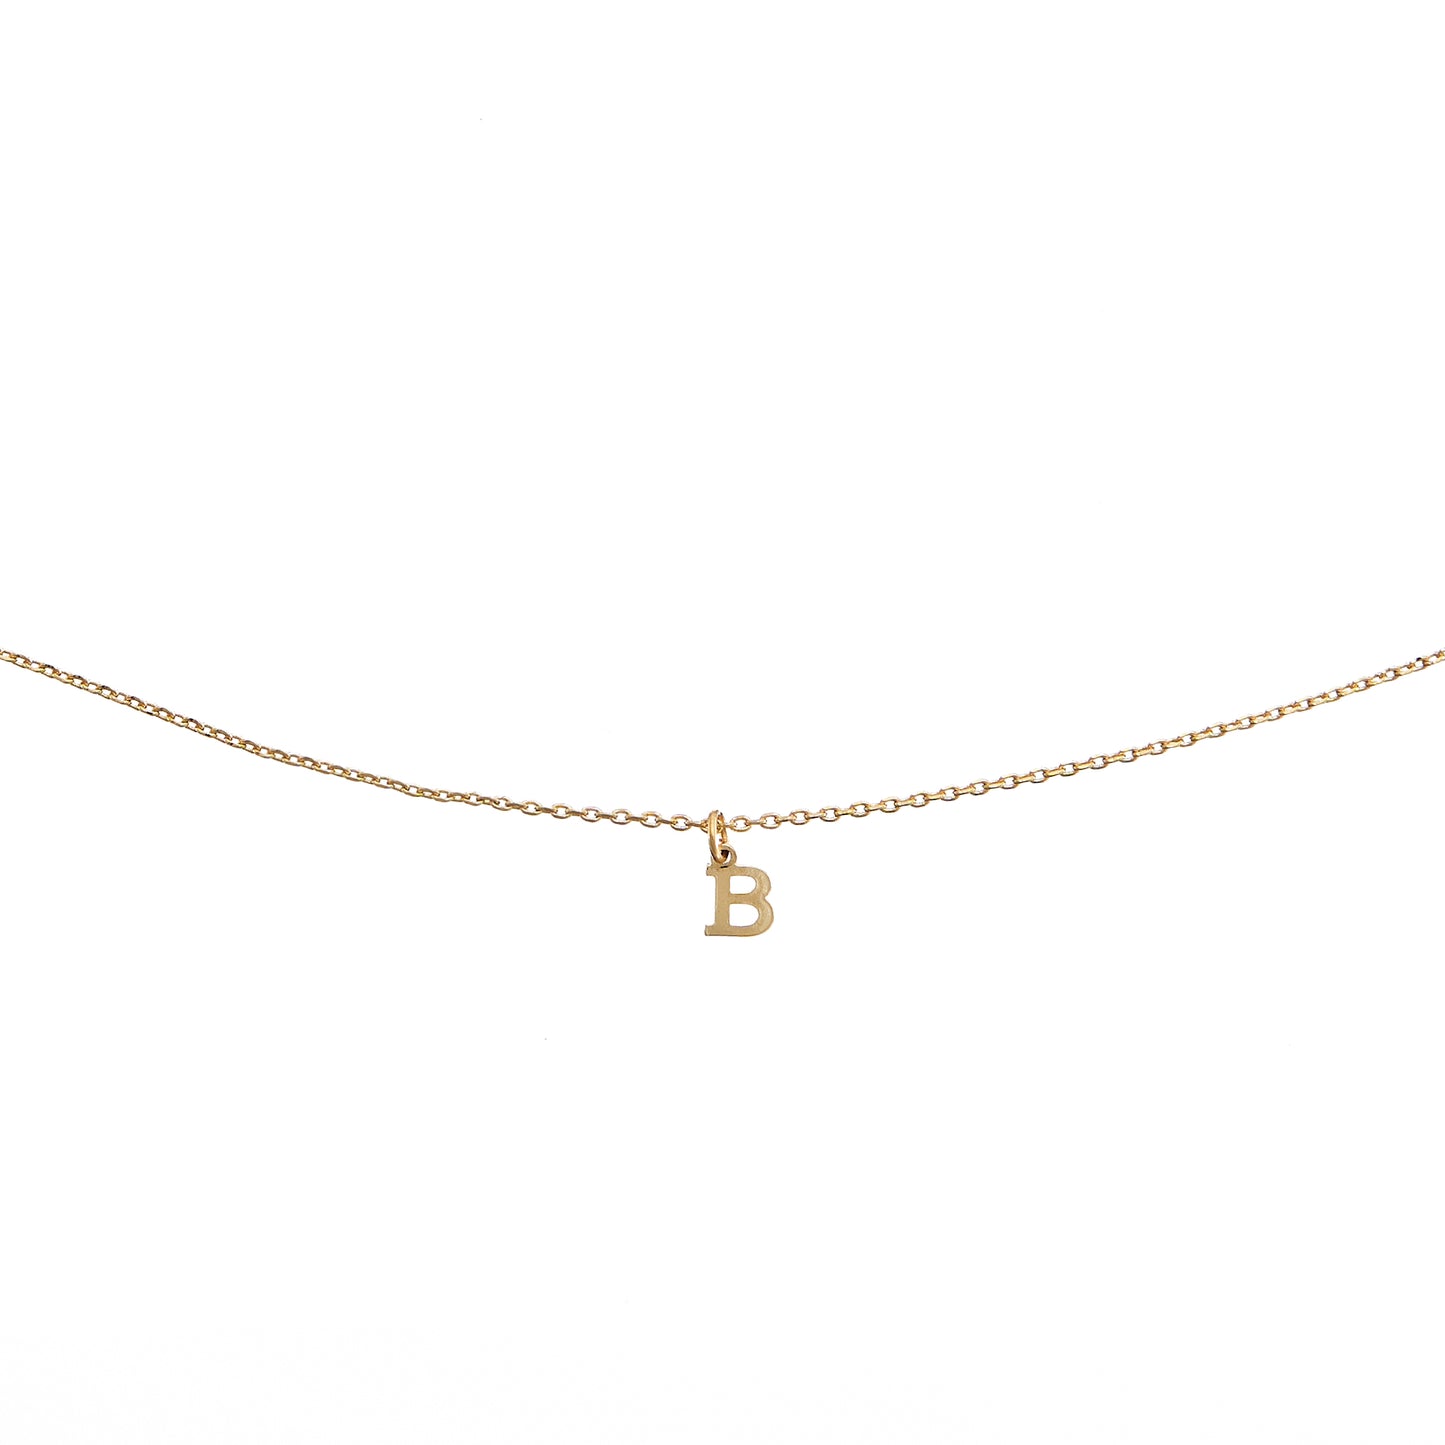 SALE Dainty Love Initial Necklace